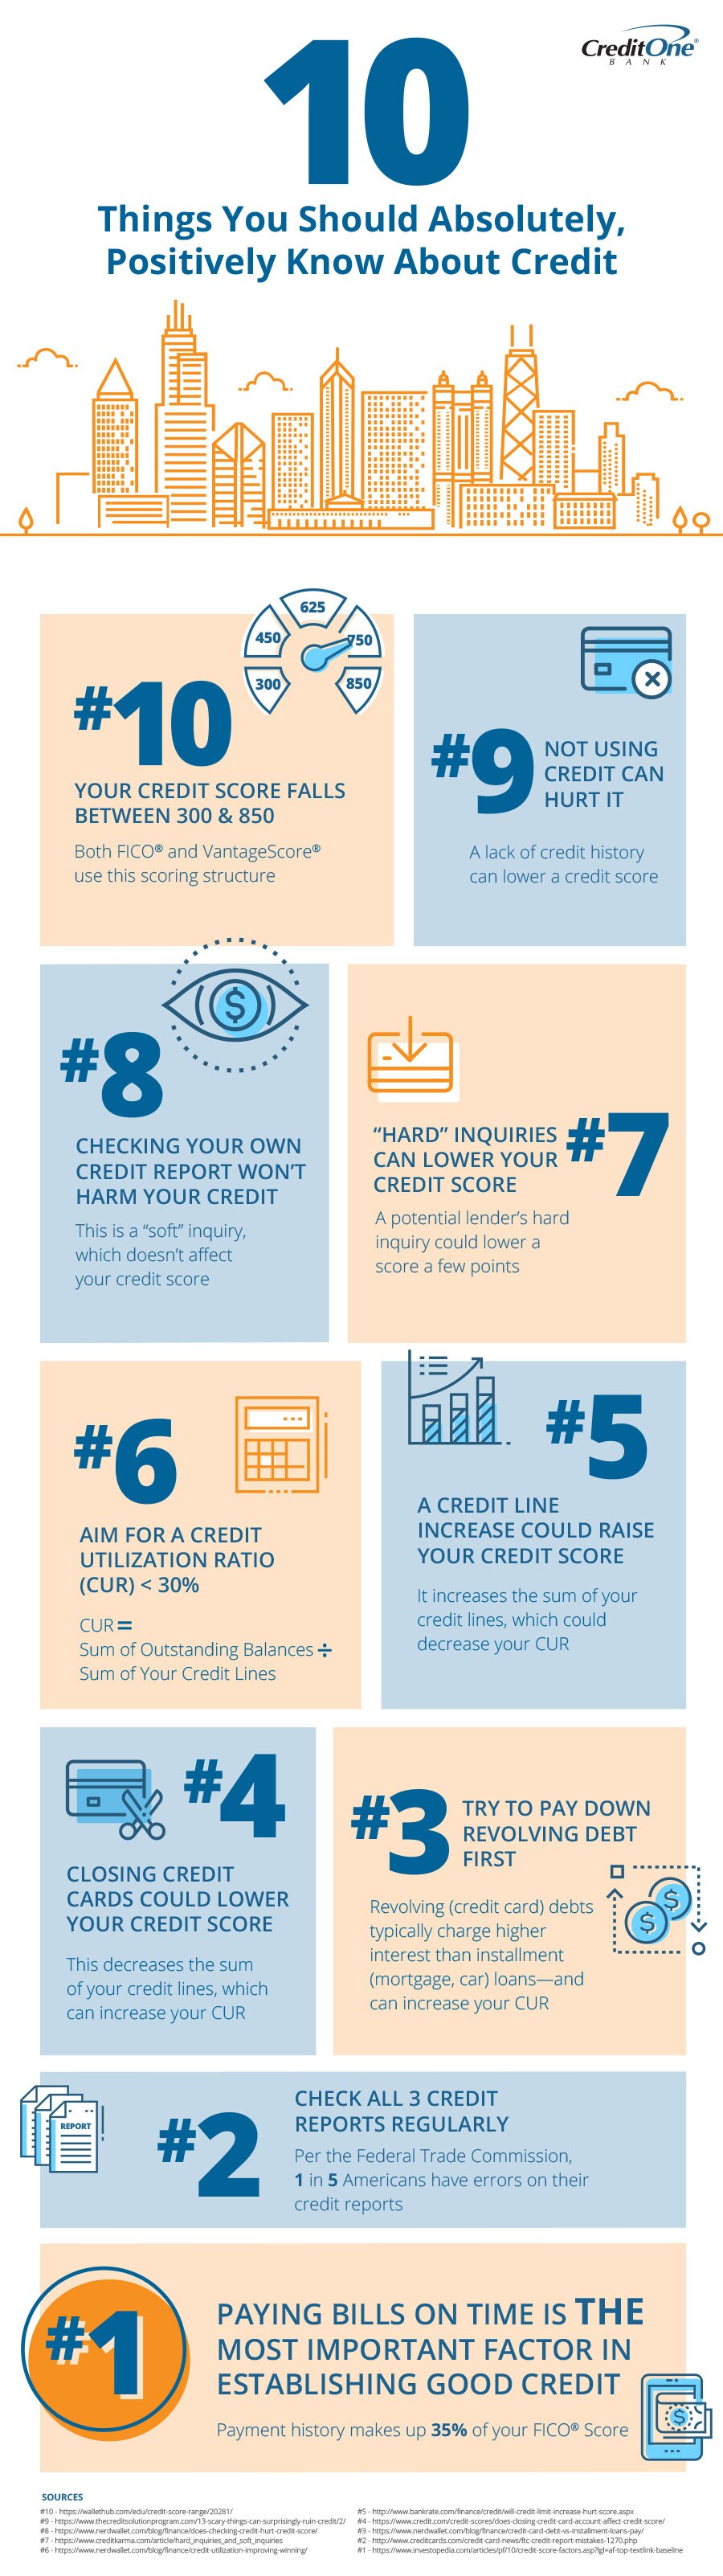 List of 10 things to know about credit [Infographic]